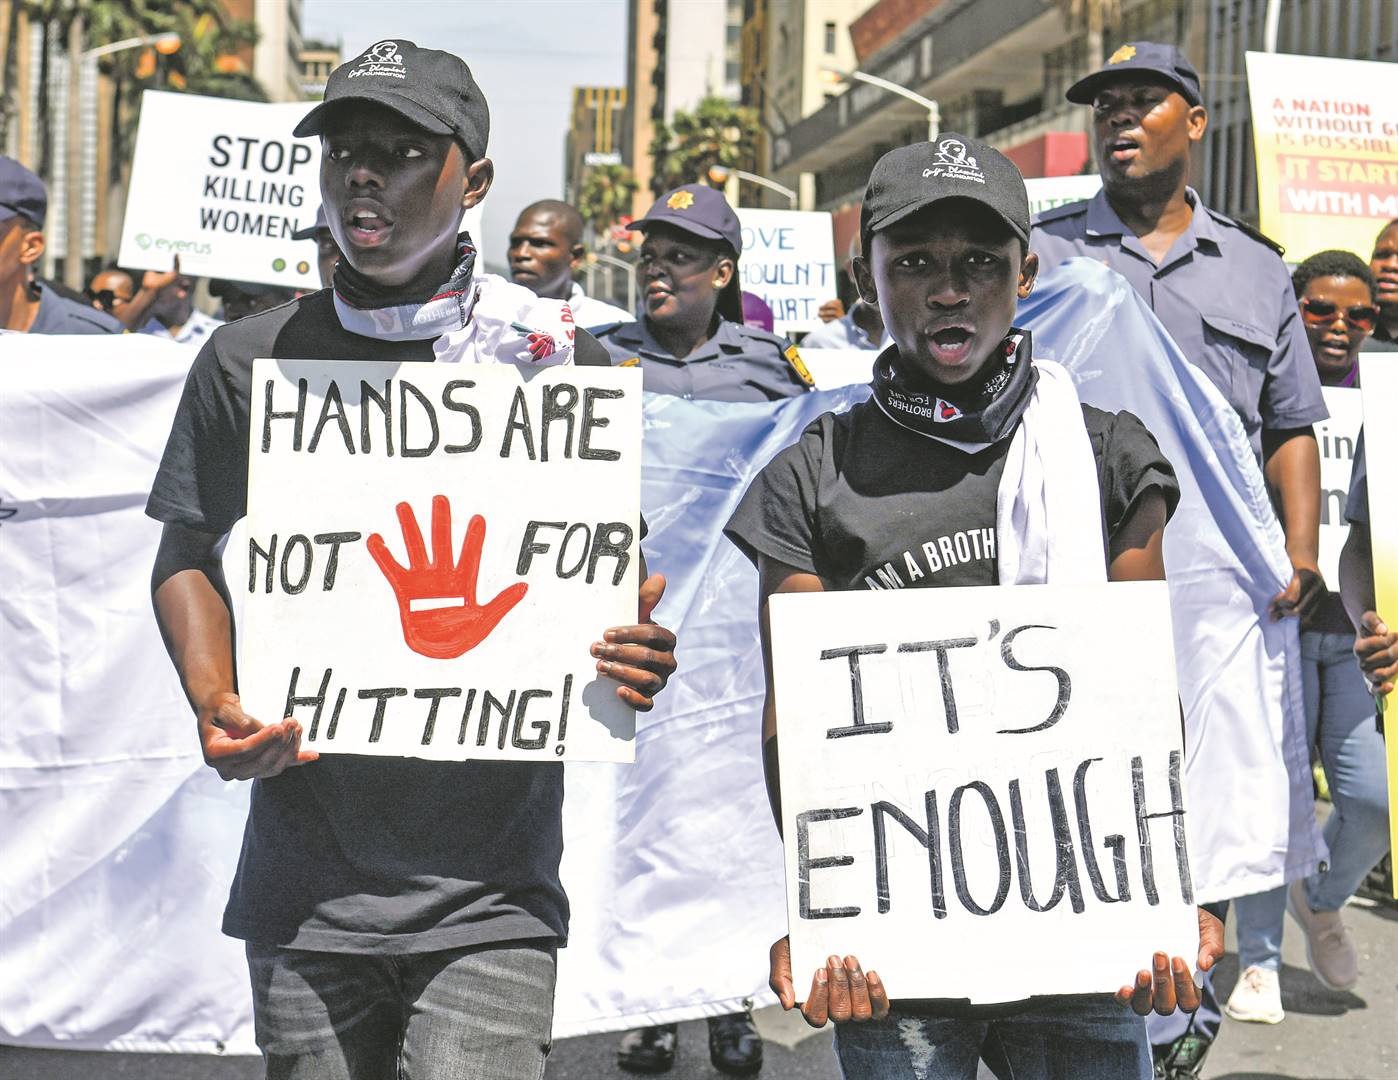 Despite ongoing campaigns to raise awareness about gender-based violence and femicide, South African women remain under siege. Photo: Darren Stewart / Gallo Images